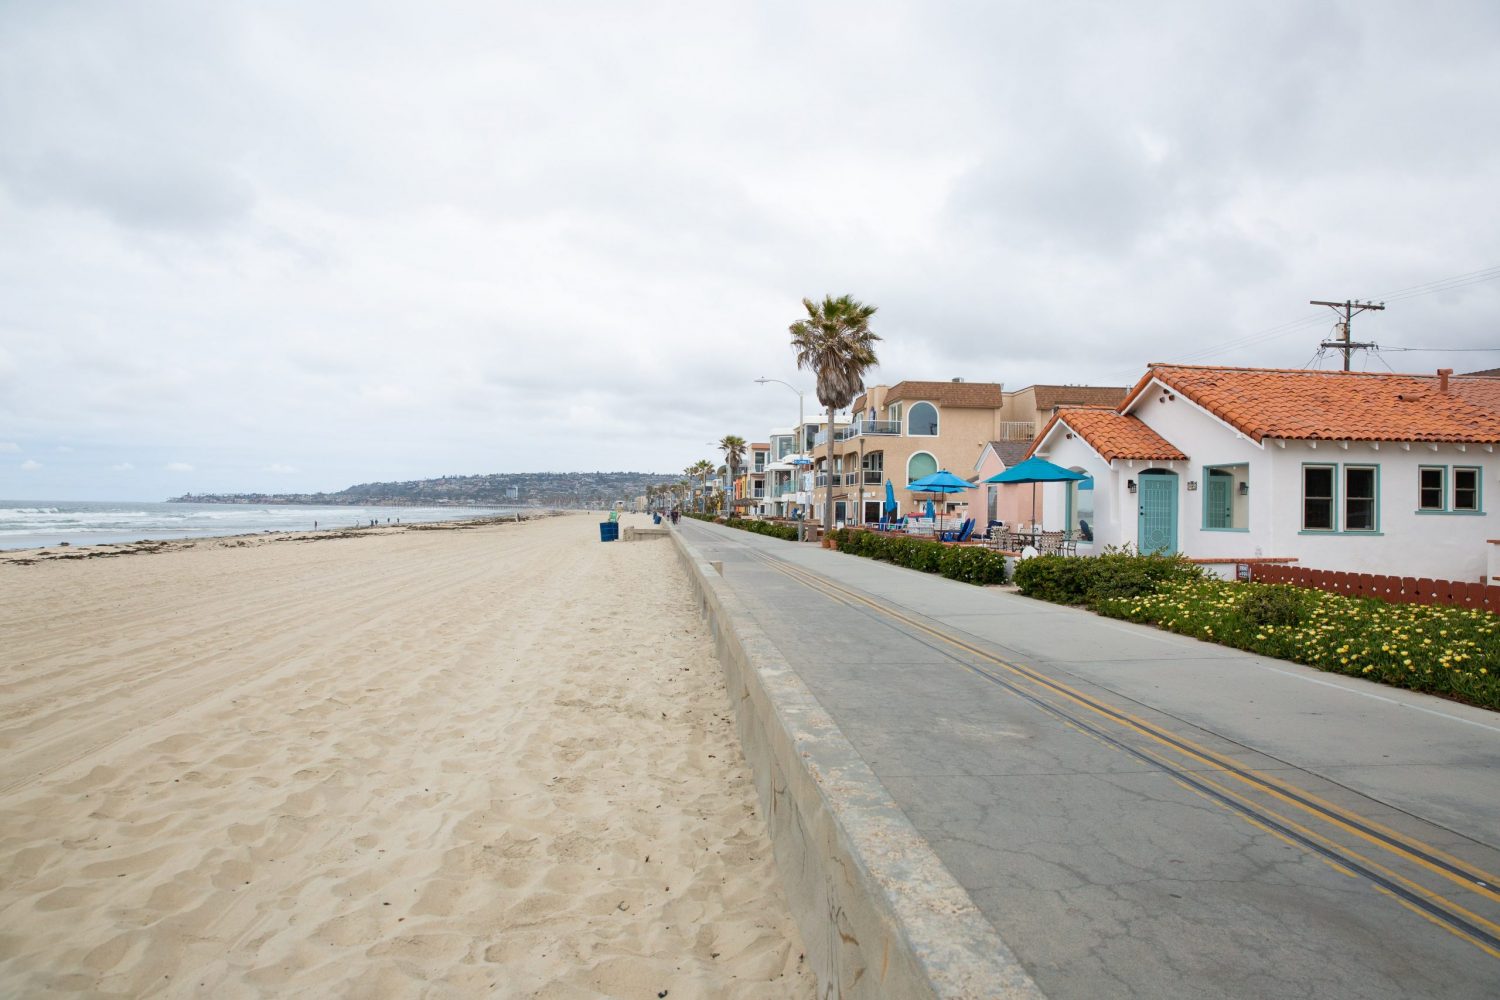 view of the street and the beach in front of the house